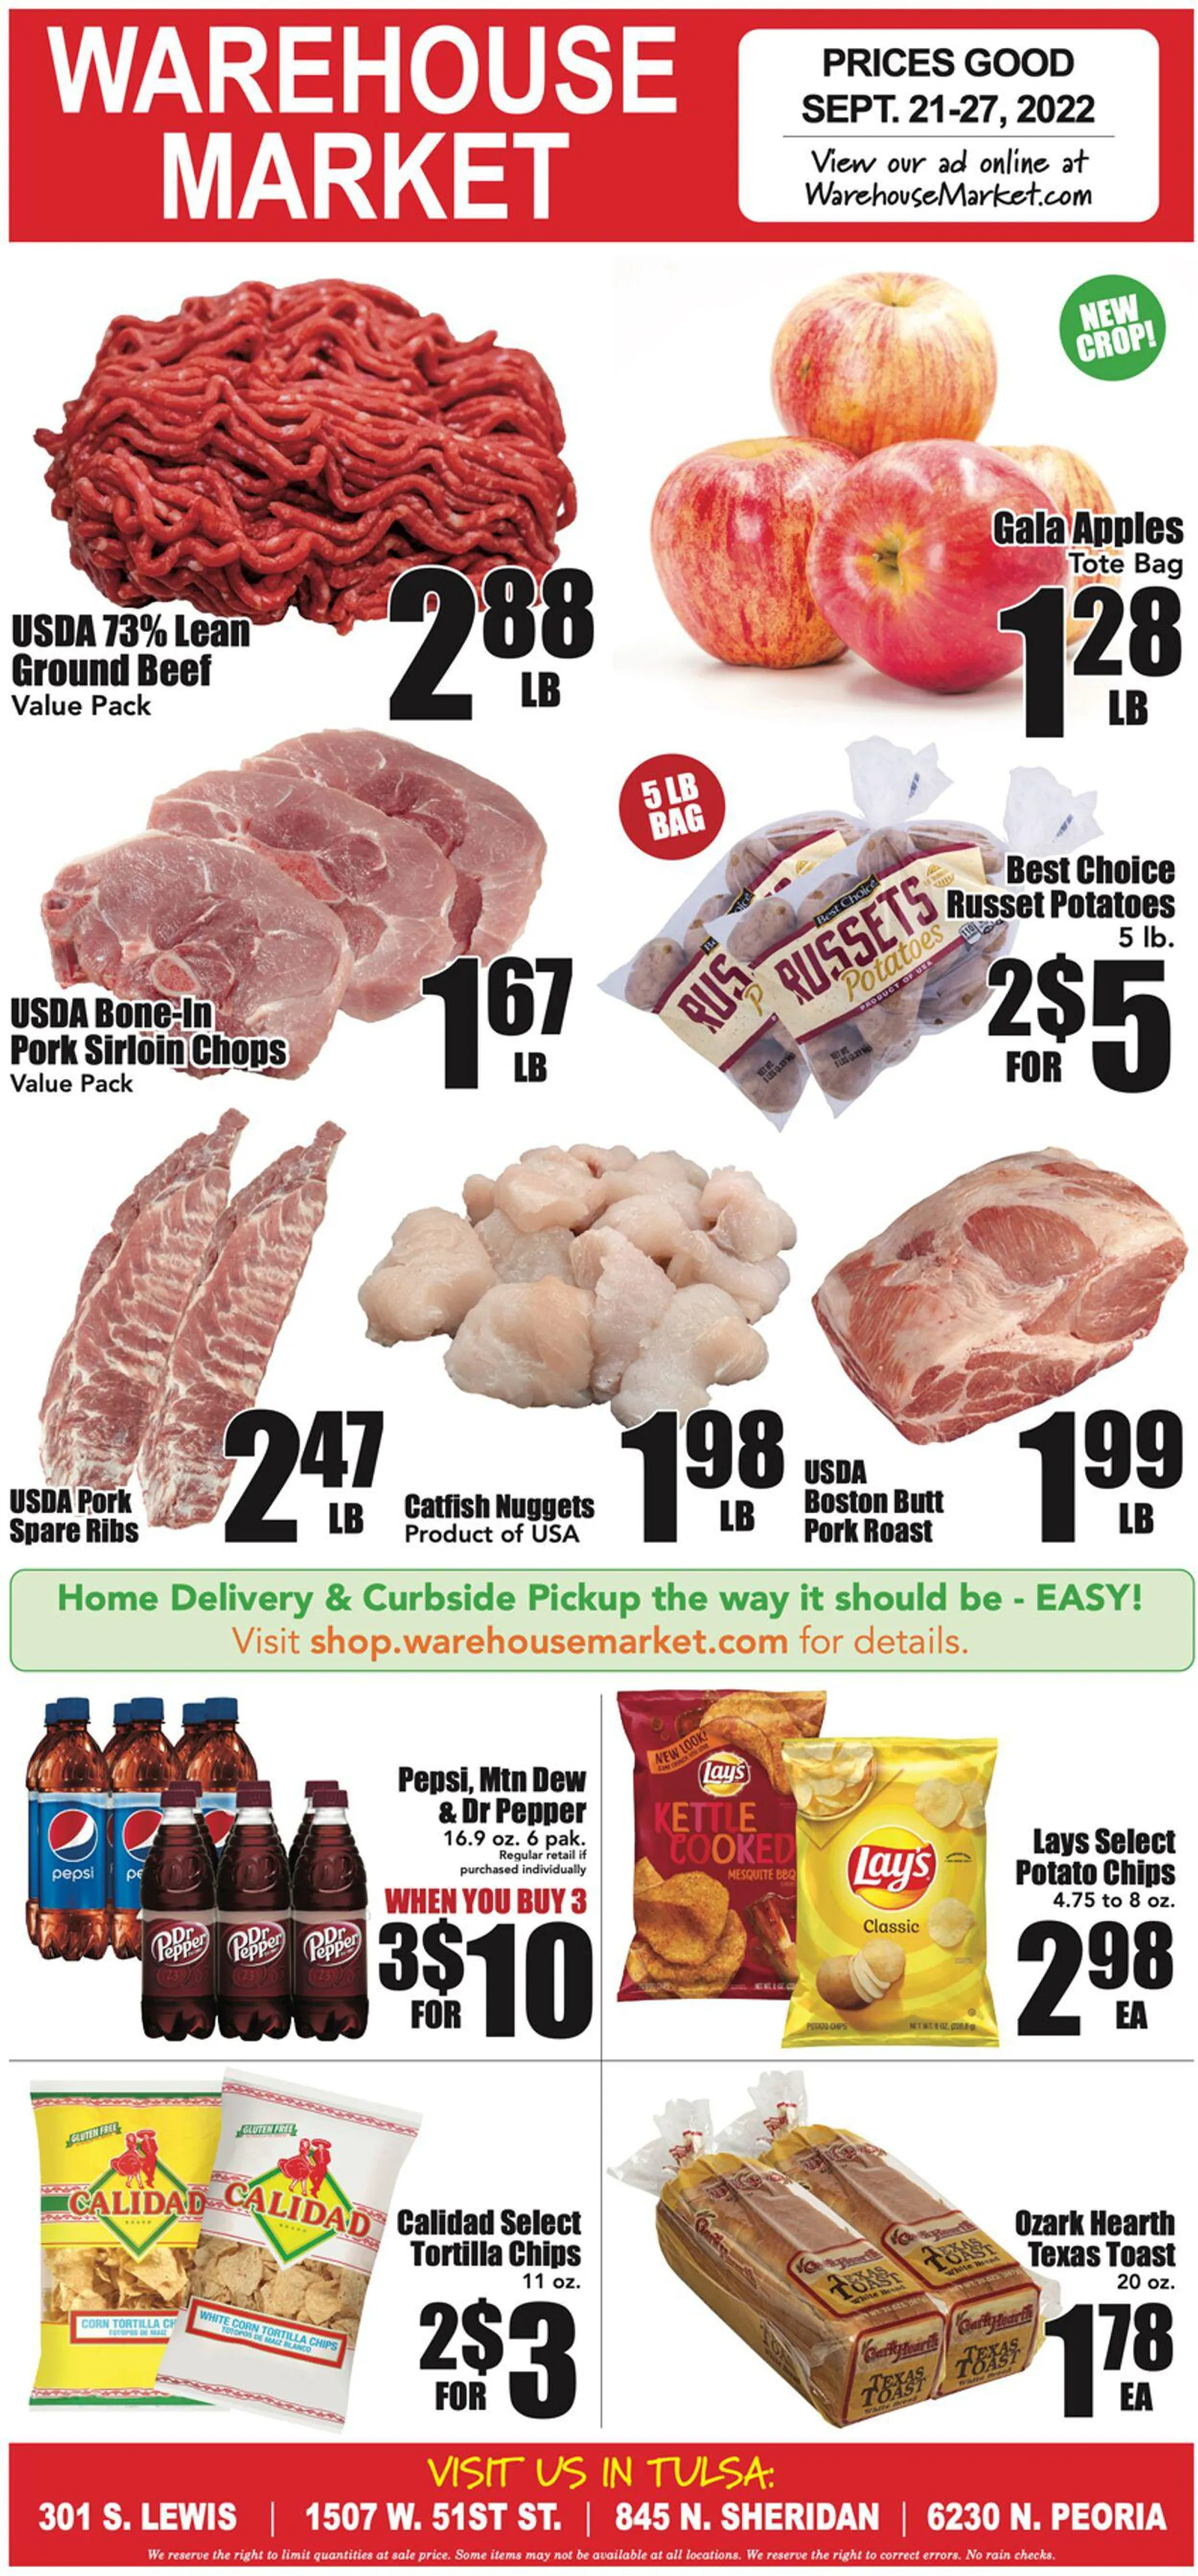 Warehouse Market Current weekly ad - 1